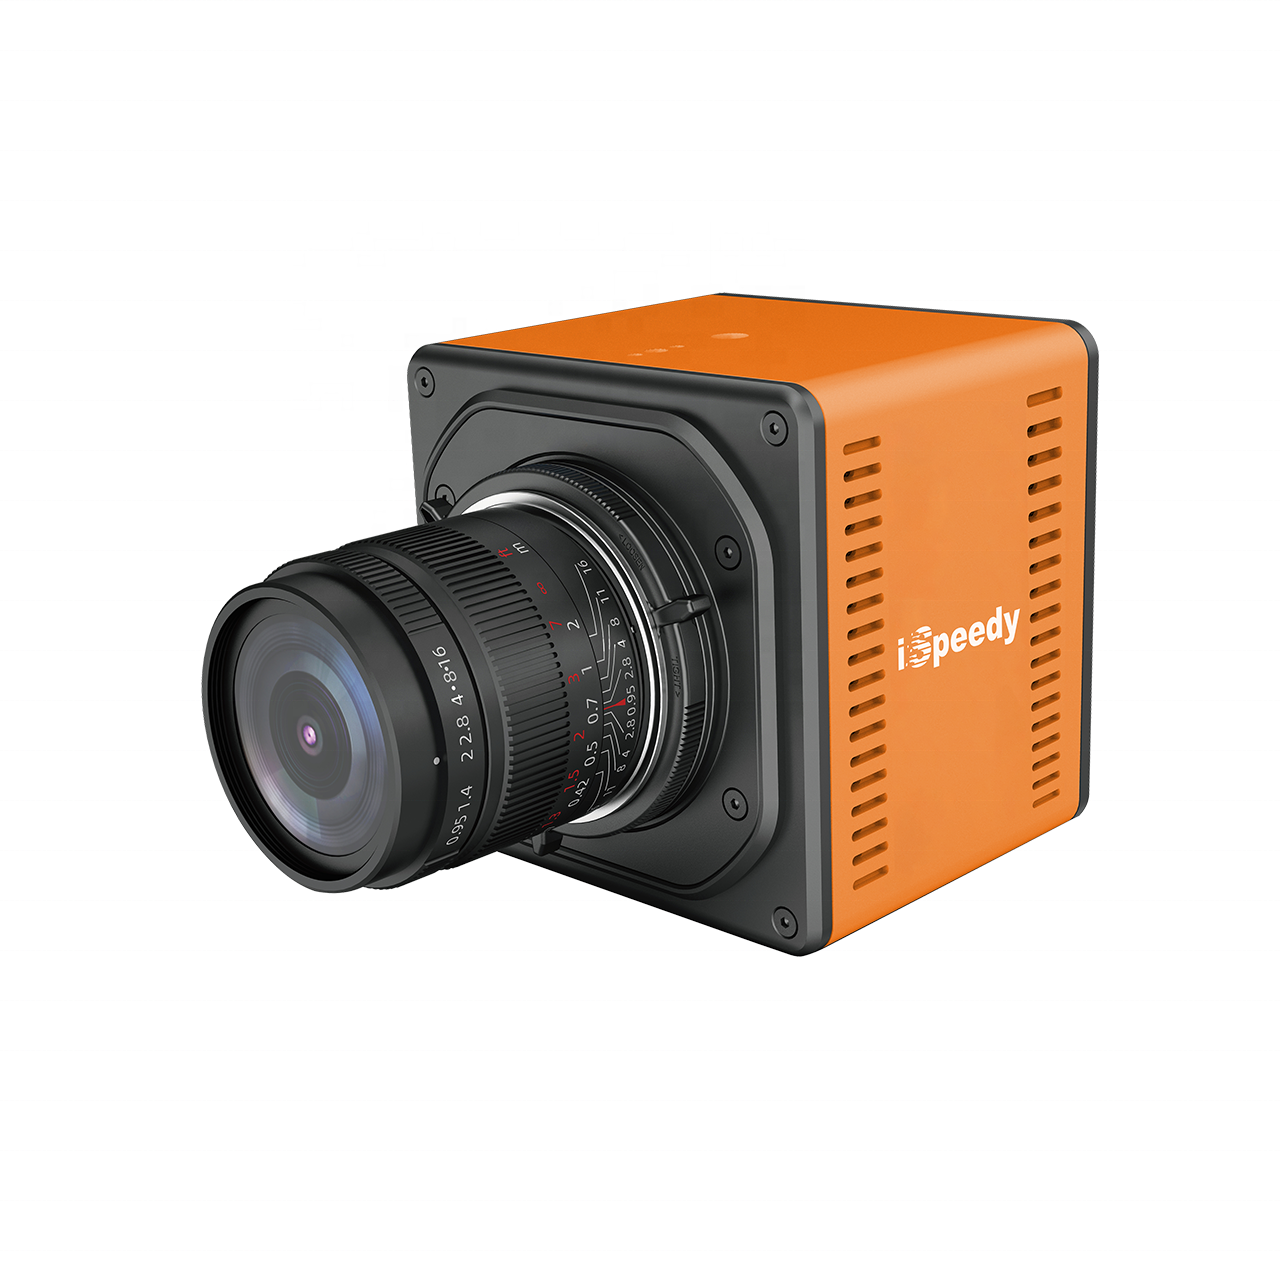 50000fps 5.2MP iSpeedy Ultra High Speed Video Camera for Discharge Research